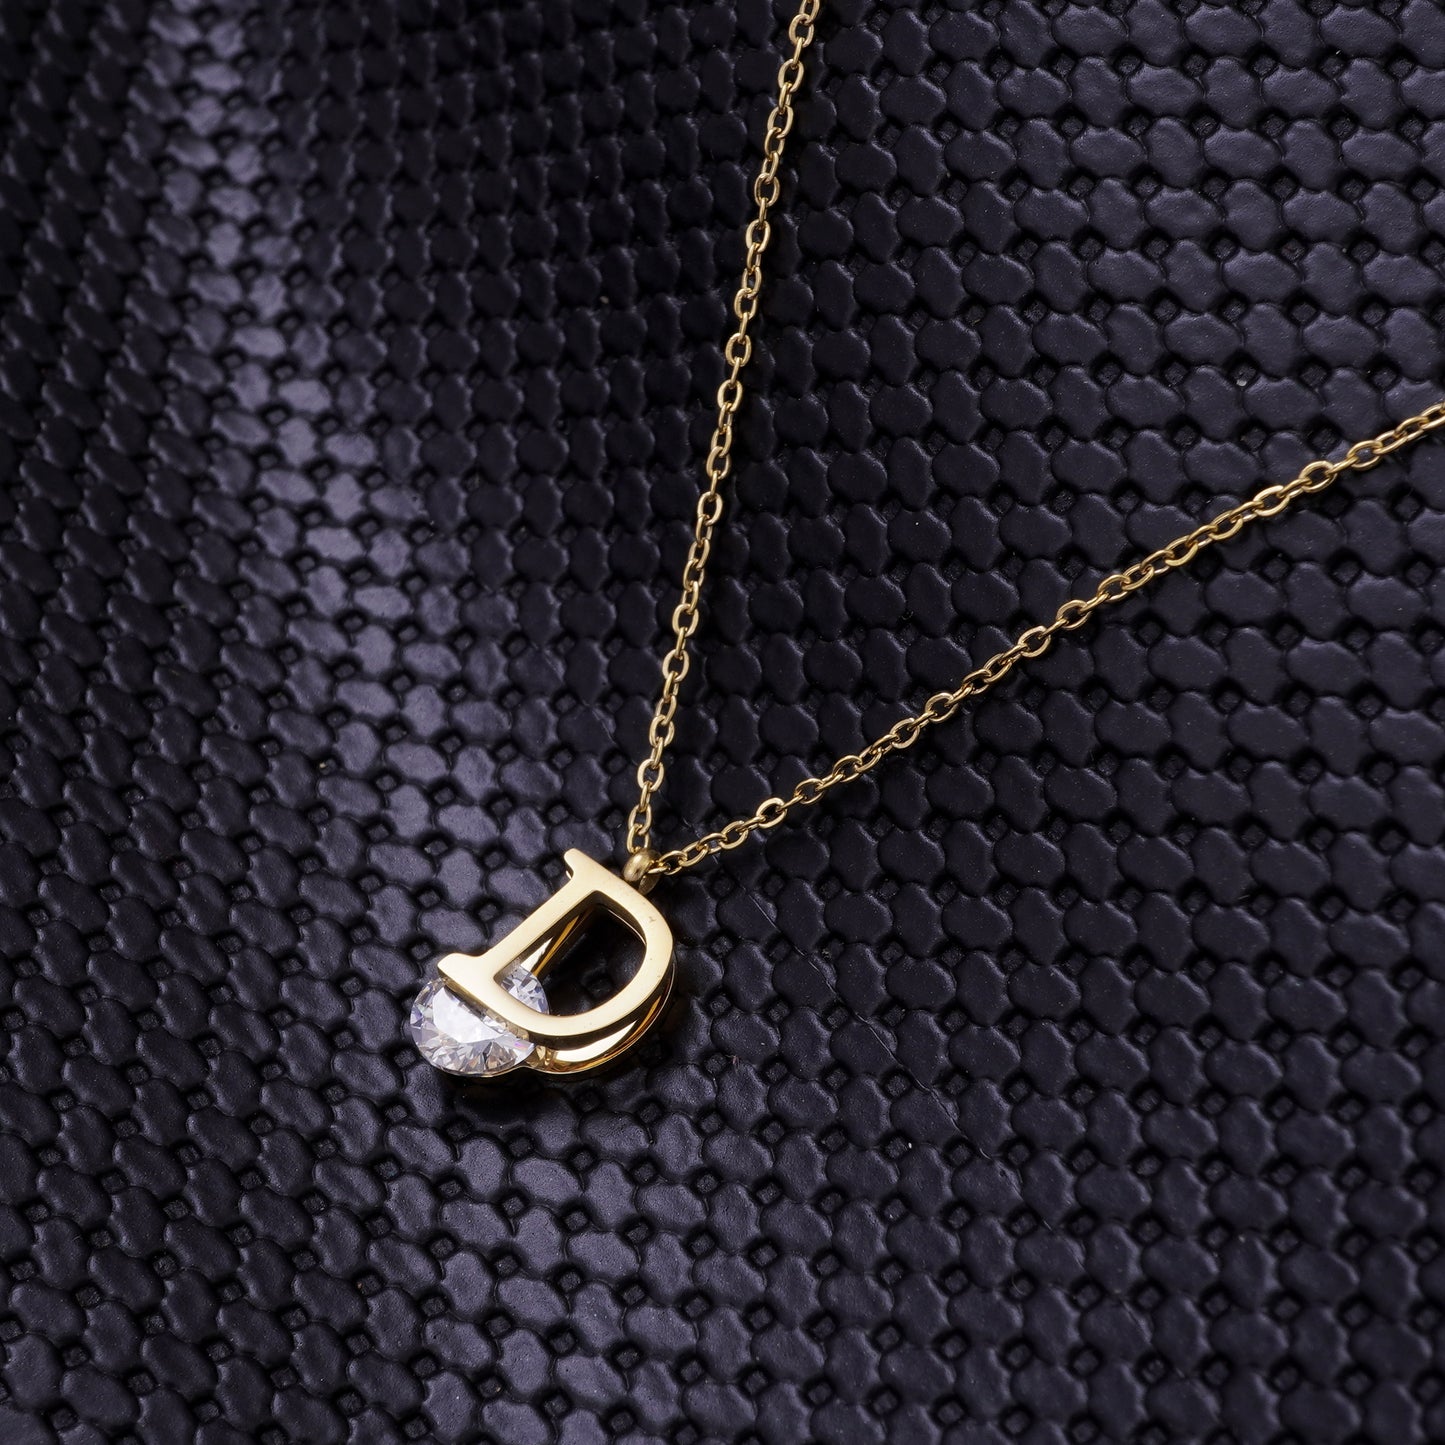 D DAY DIAMOND GOLD NECKLACE